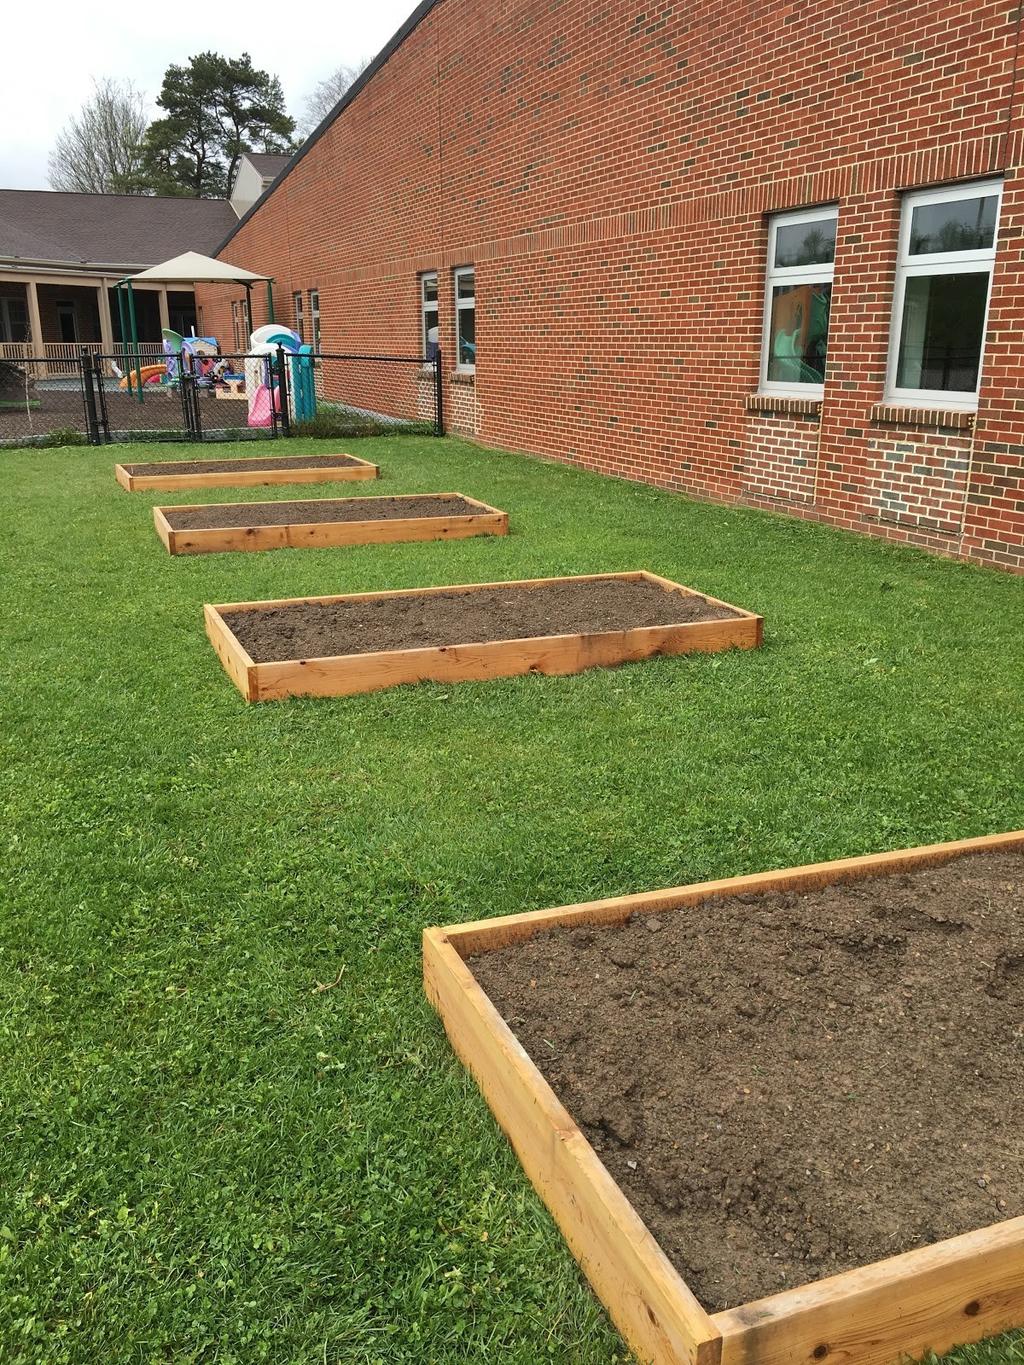 Working with raised beds can help protect students from elevated soil lead levels. A student spreads a soilless potting mix in a raised bed.